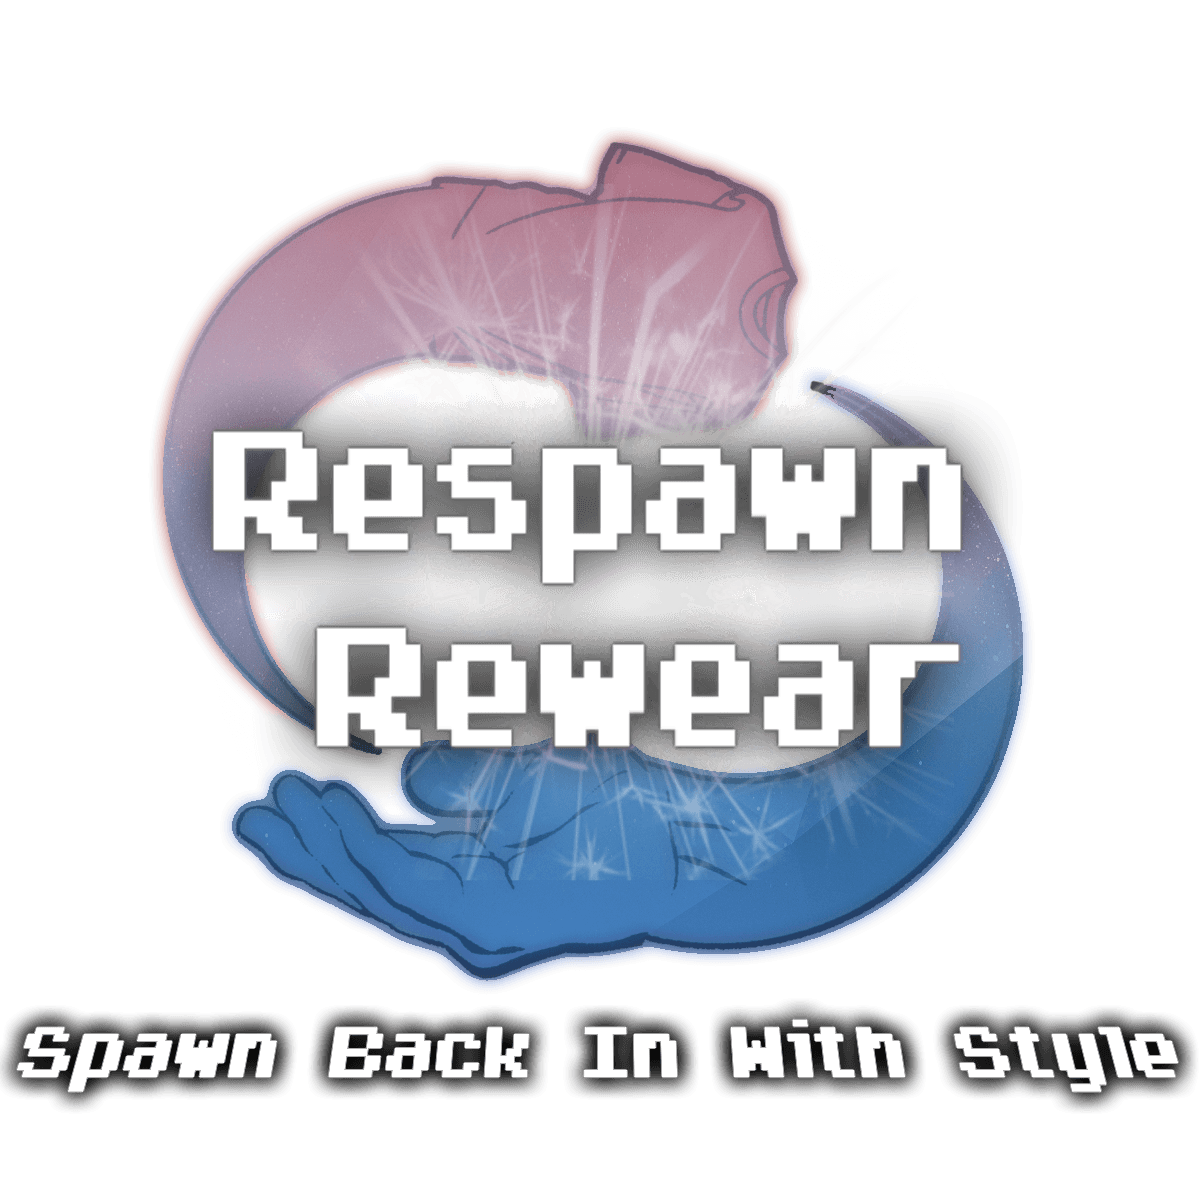 Respawn Logo - Respawn Rewear | Featuring custom t-shirts, prints, and more